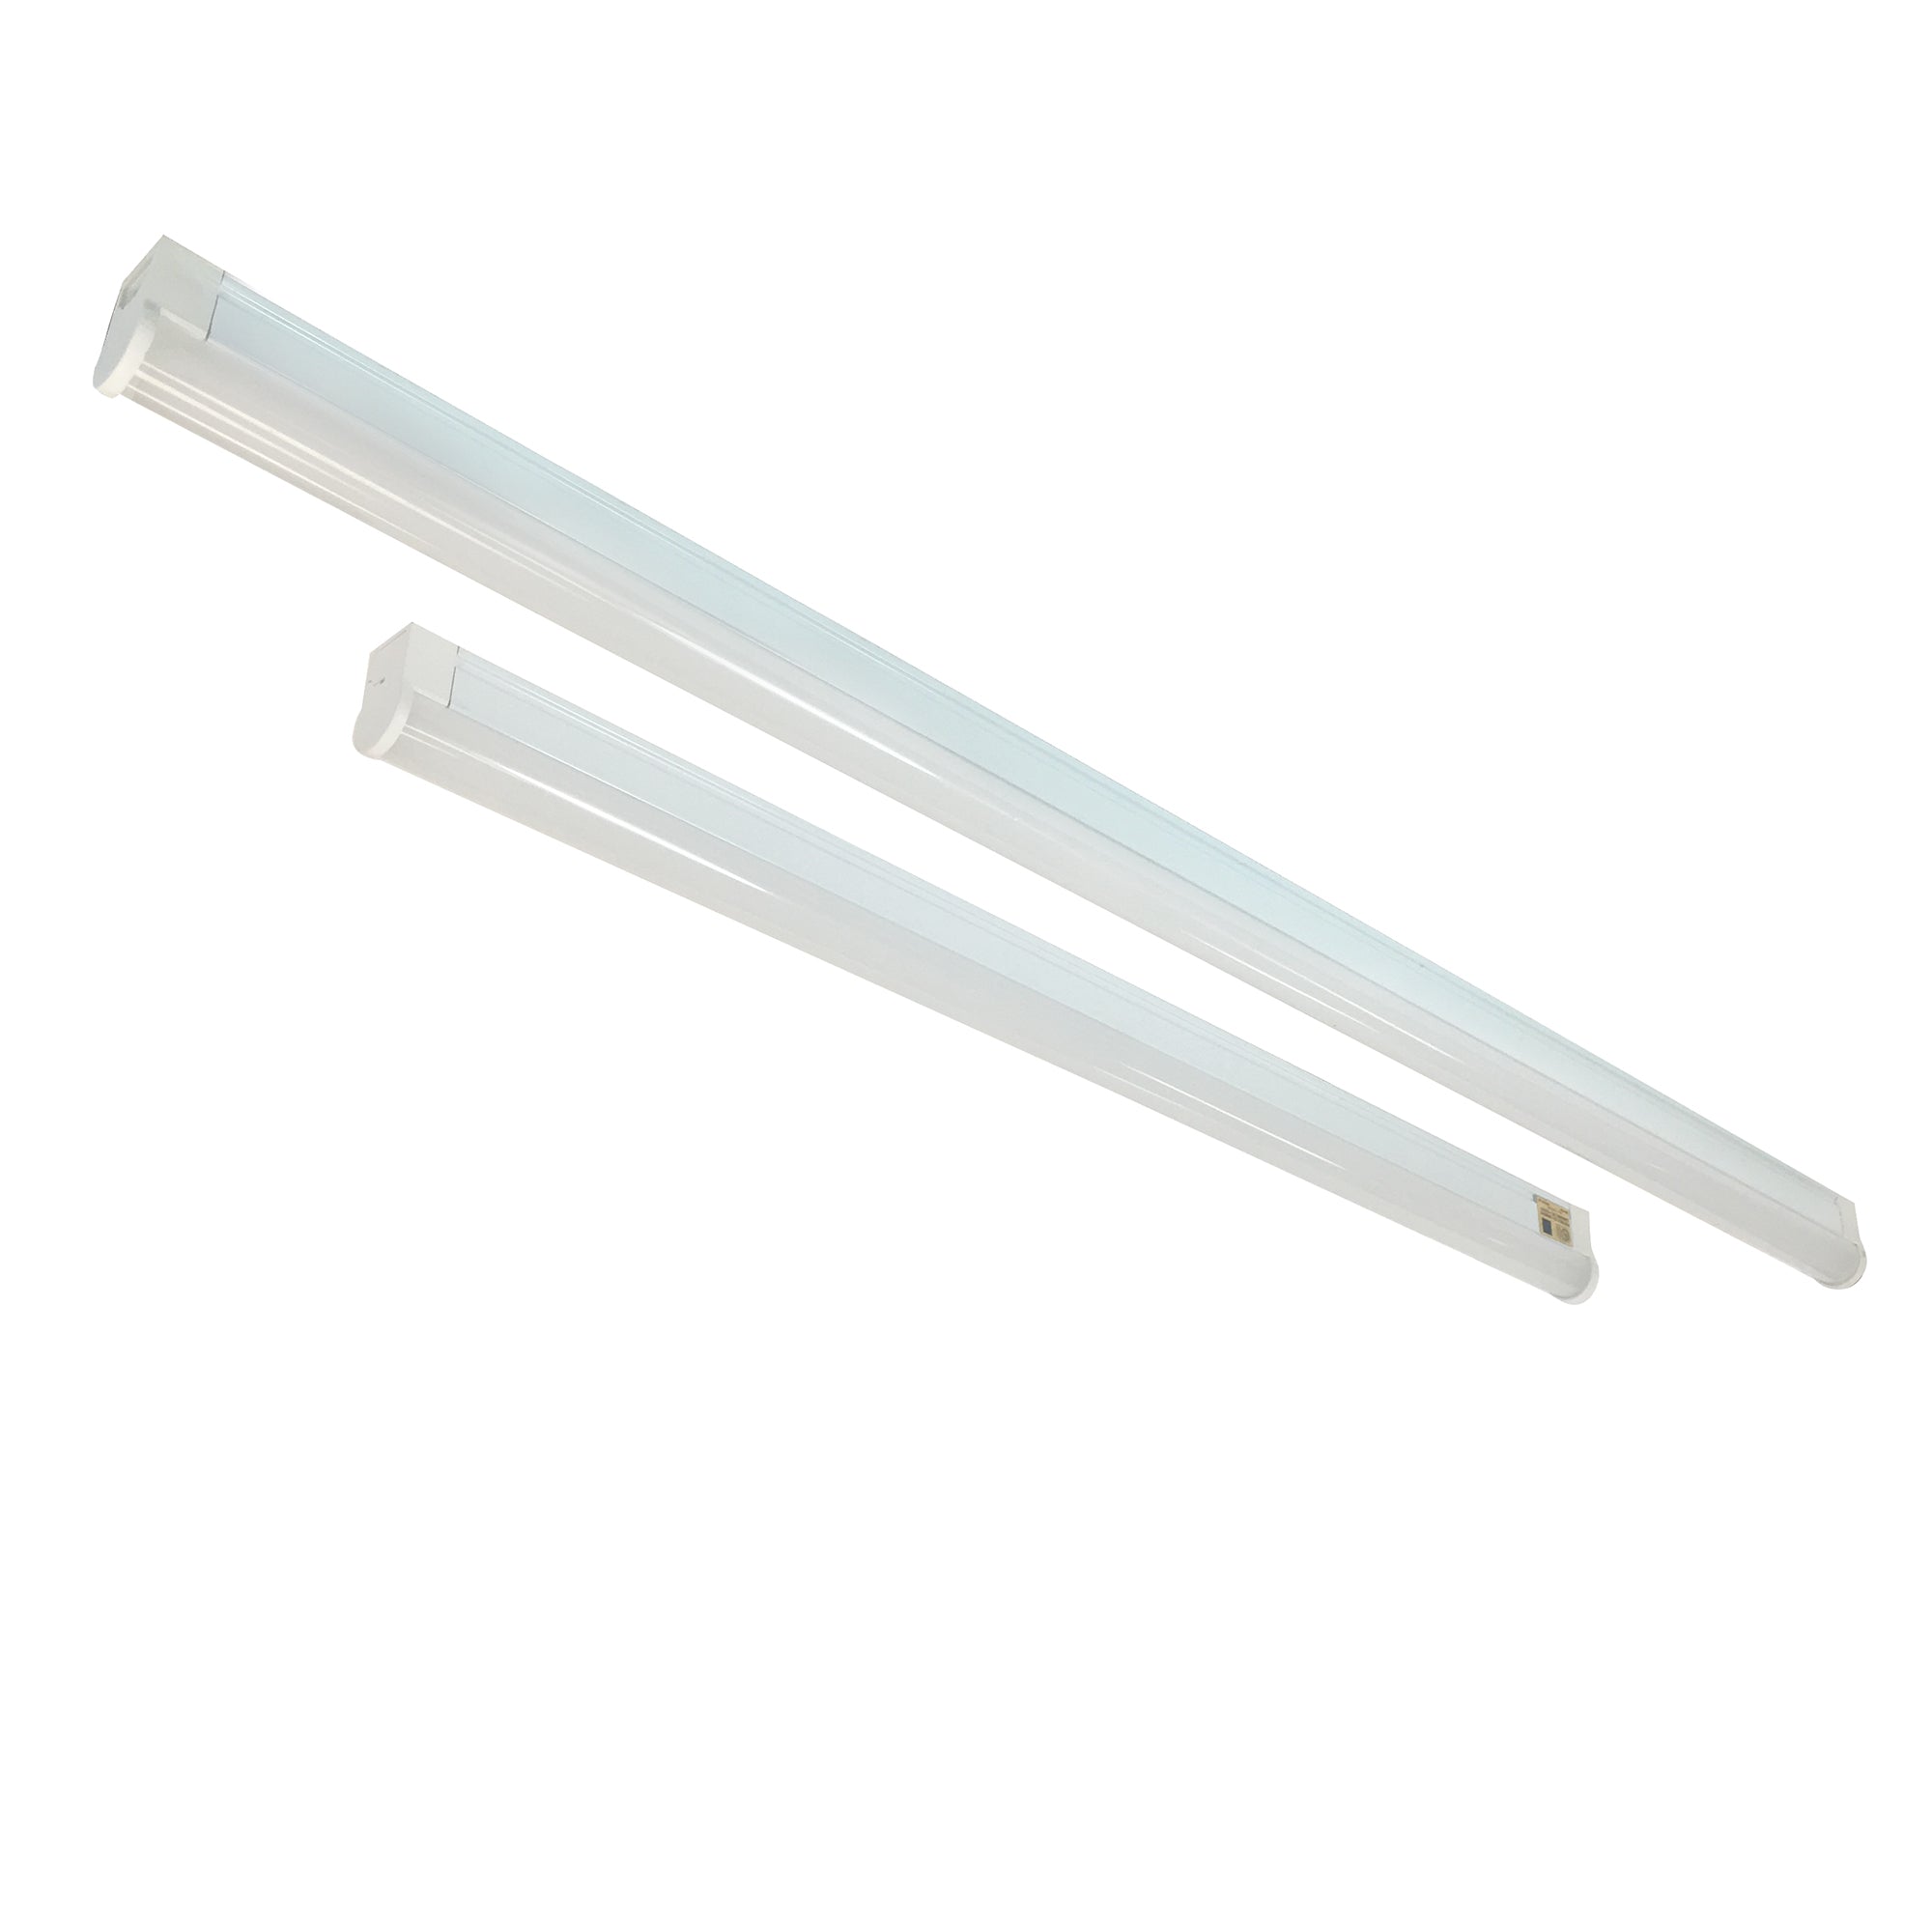 Nora Lighting NULS-LED2127W - Accent / Undercabinet - 21 Inch LED Linear Undercabinet, 2700K, White